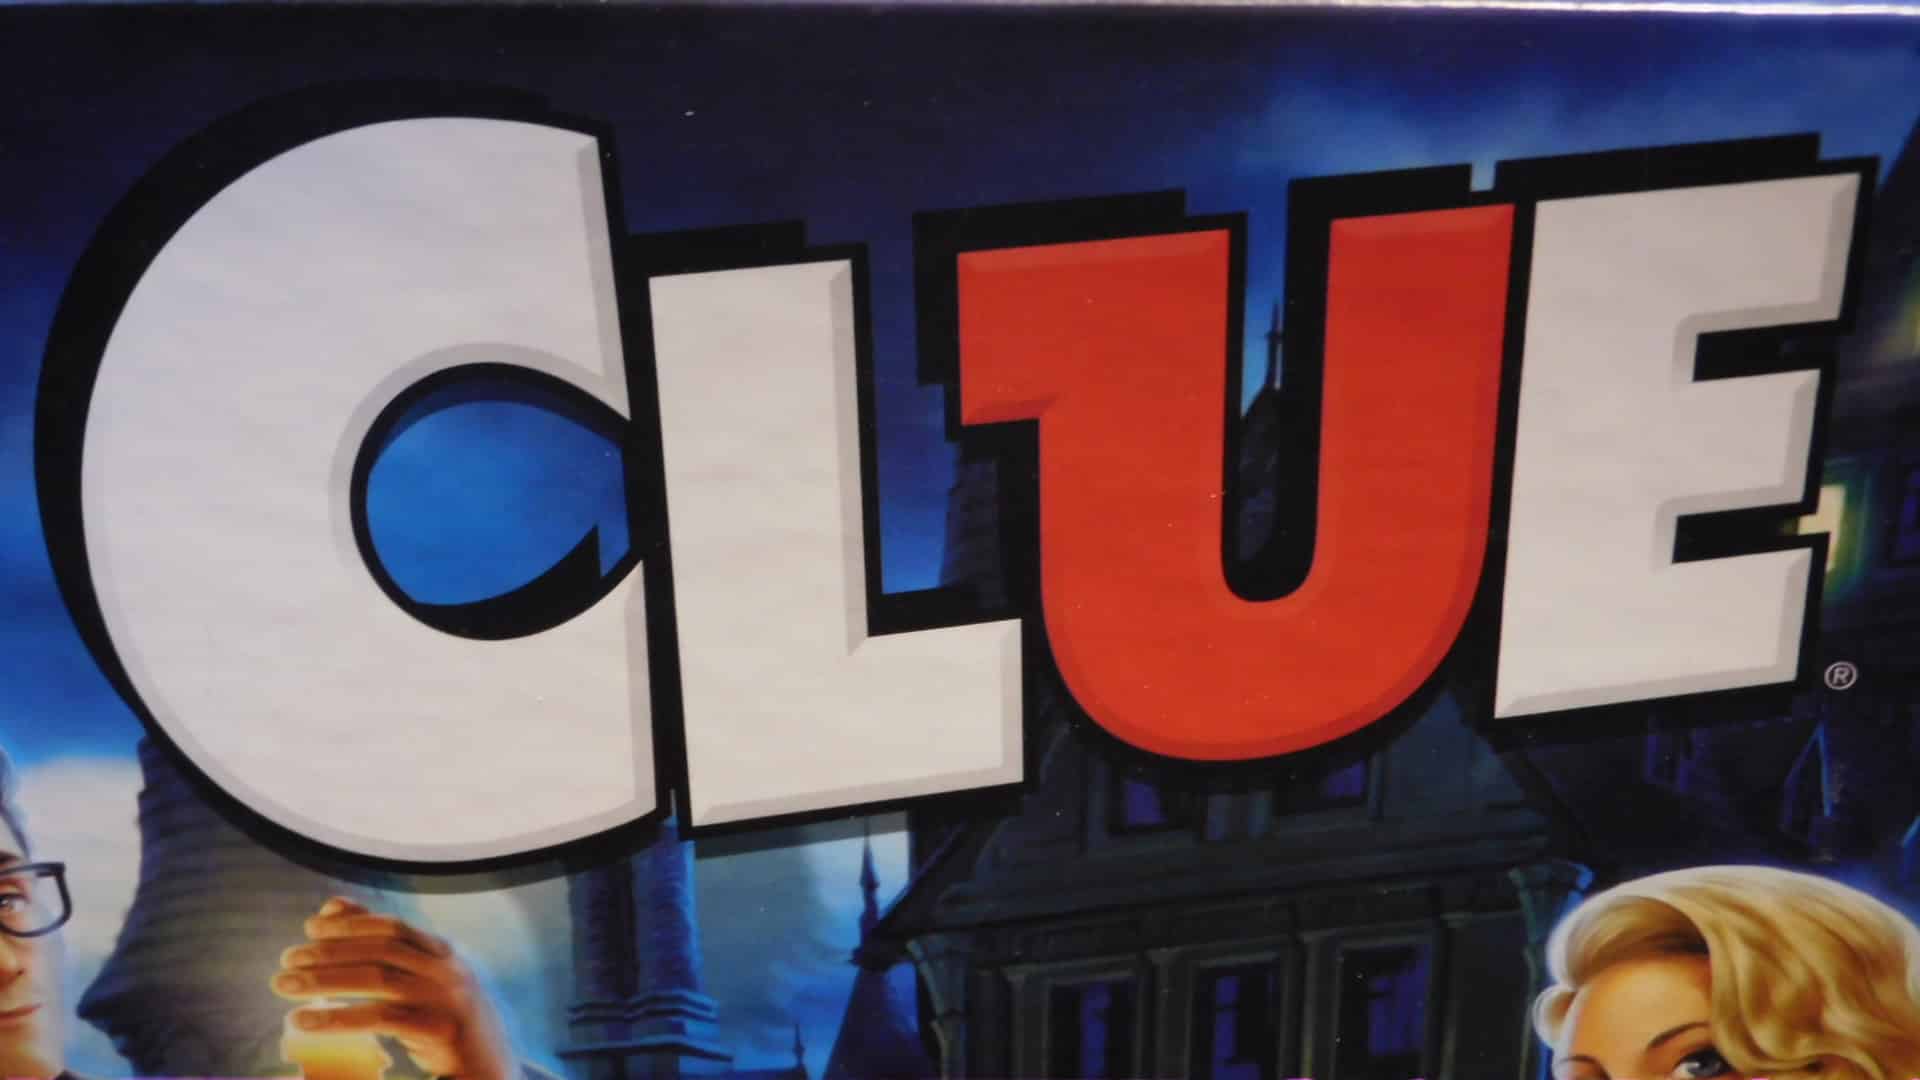 My Clue (2018) Impressions